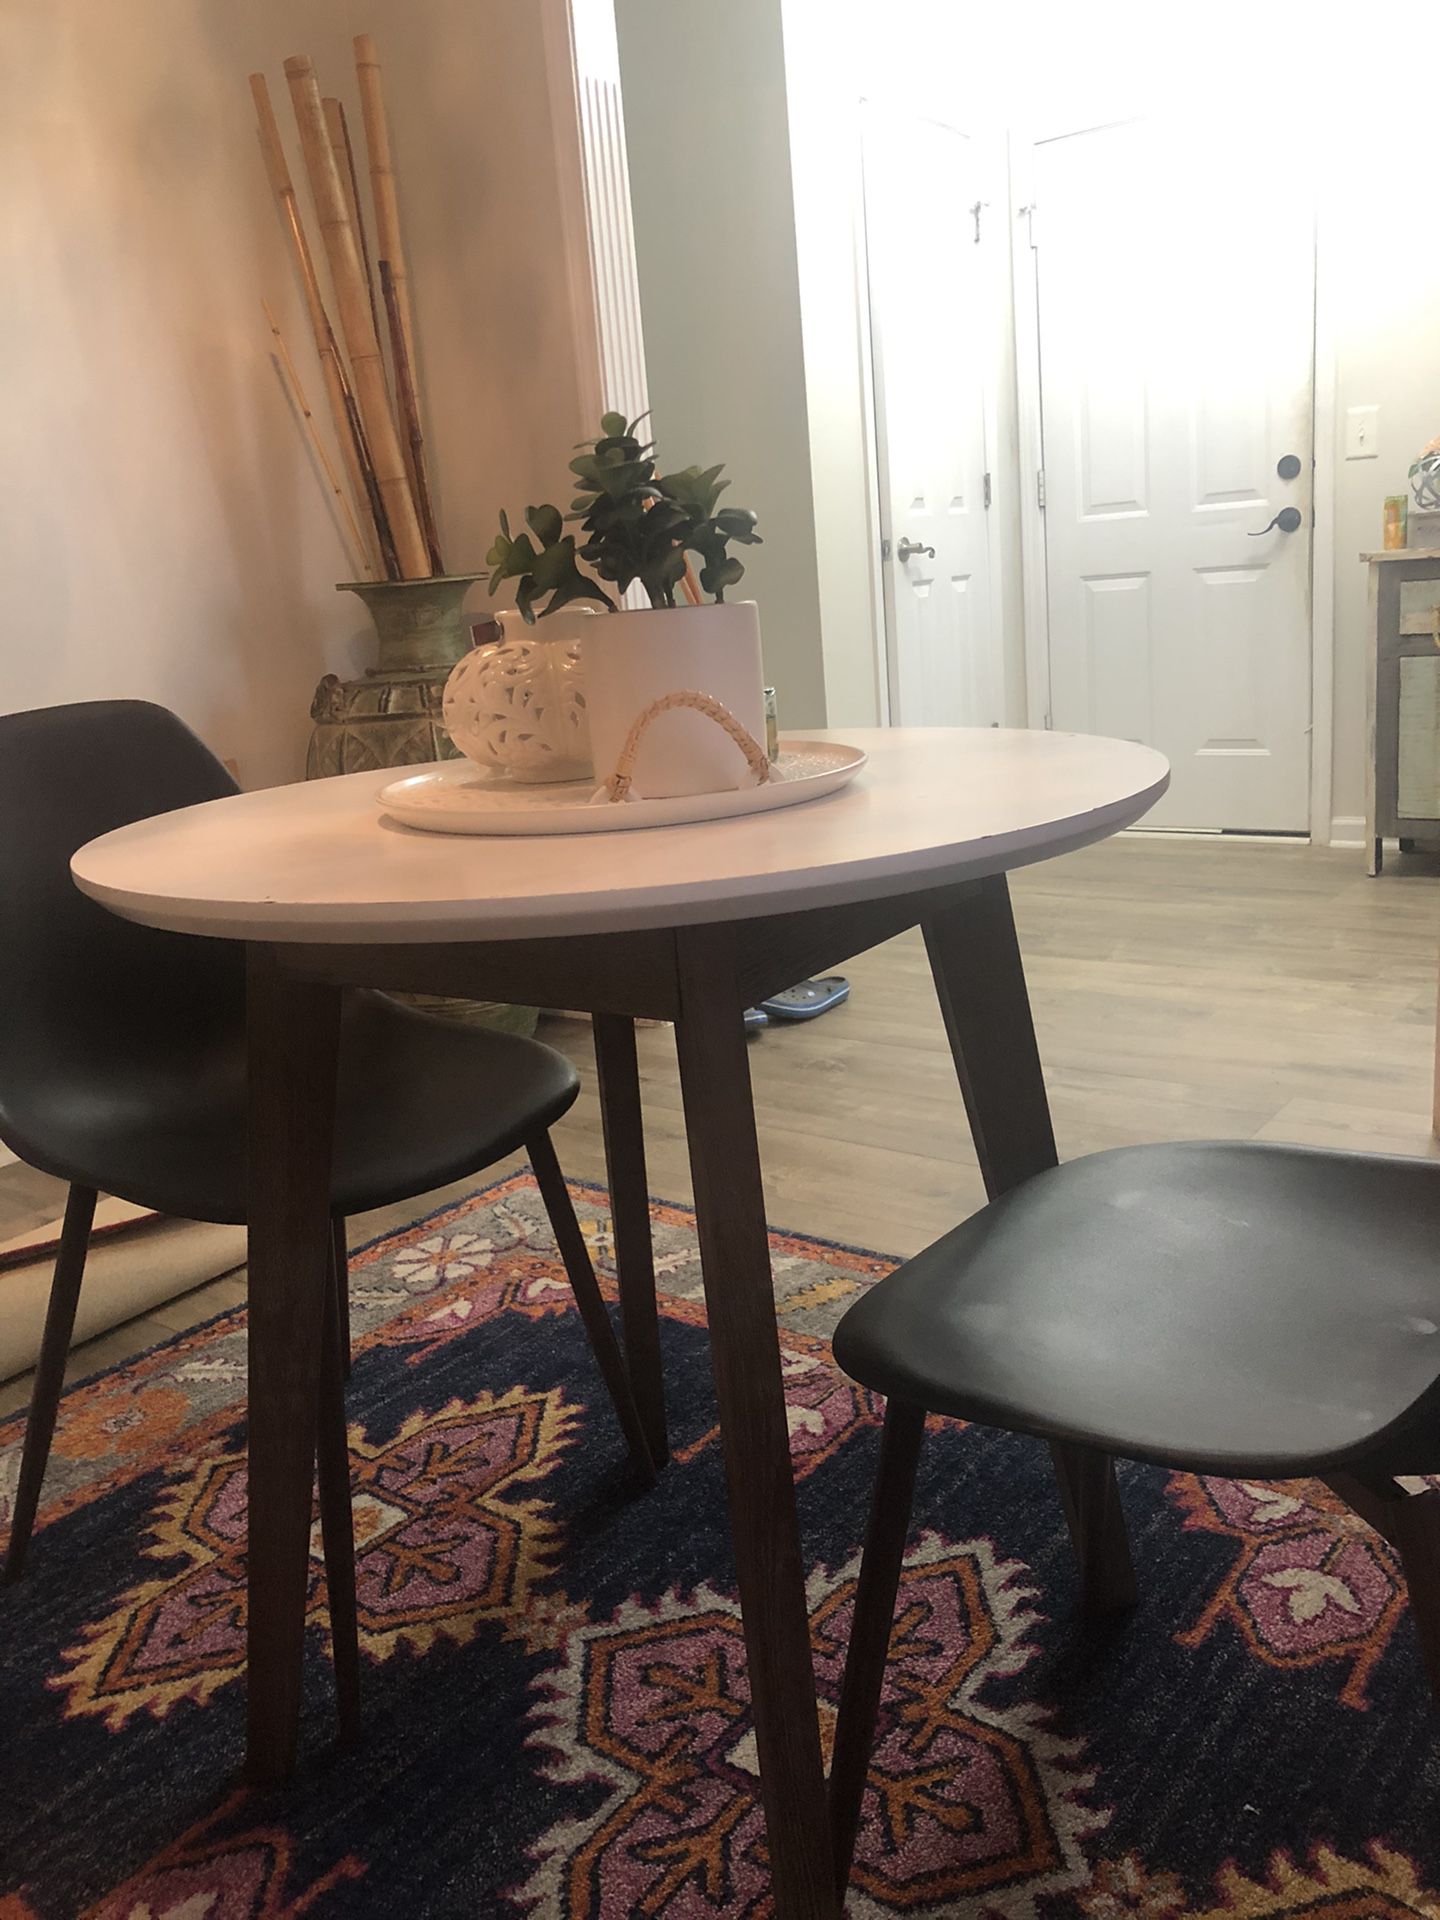 Modern table and two chairs